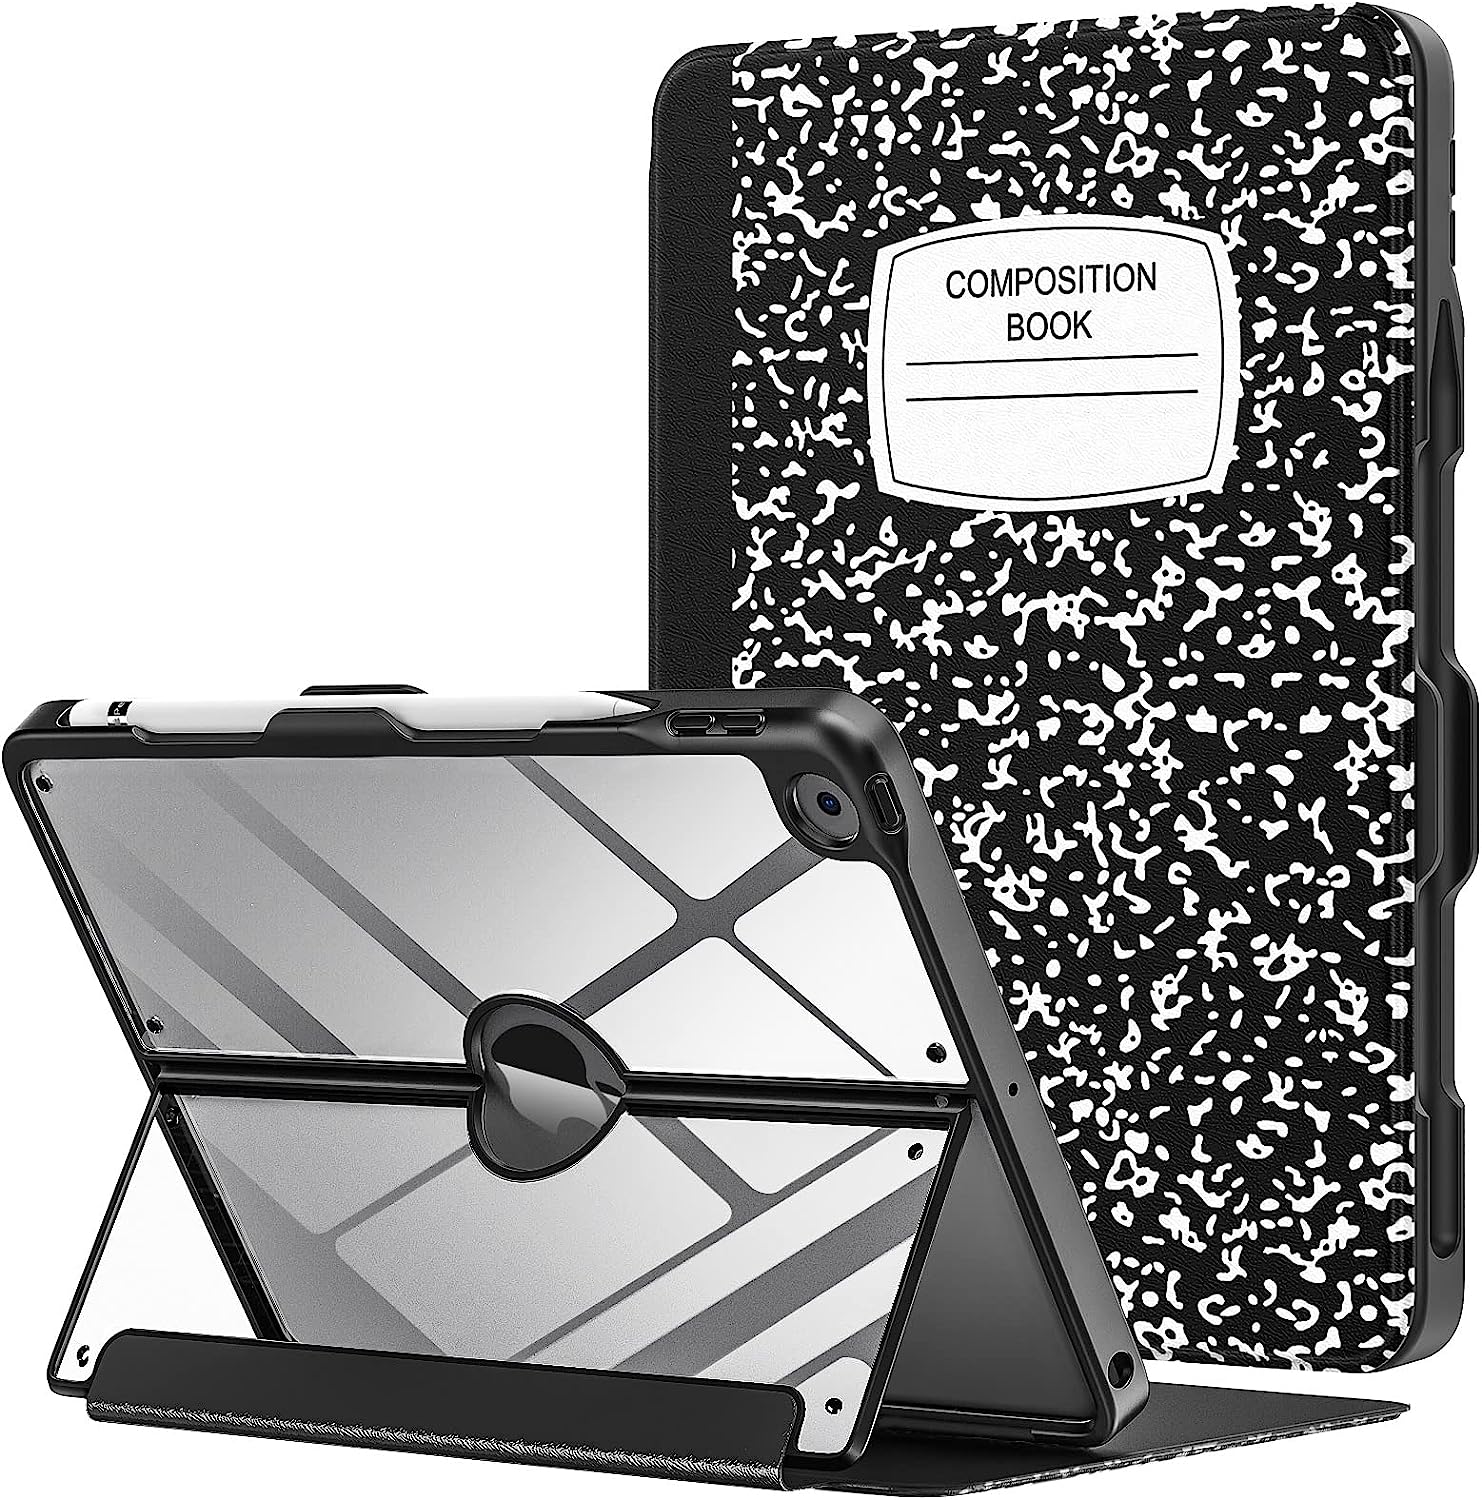 MoKo Case for iPad 9th Generation with Pencil Holder, [...]